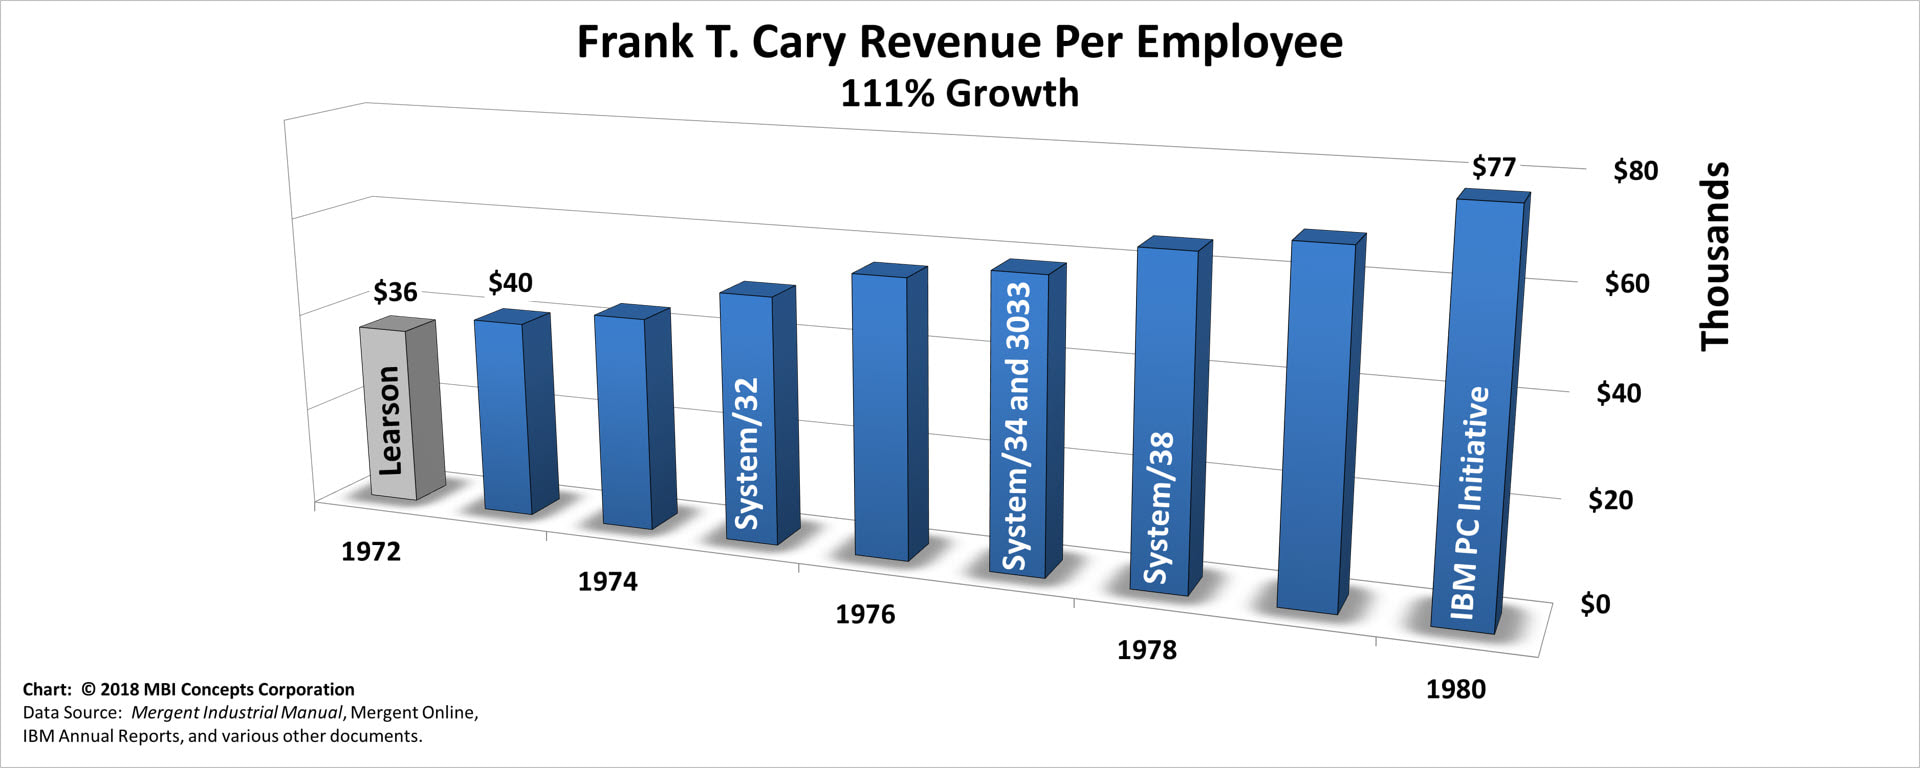 A color bar chart showing IBM's yearly revenue revenue per employee (sales productivity) from 1972 through 1980 for Frank T. Cary.